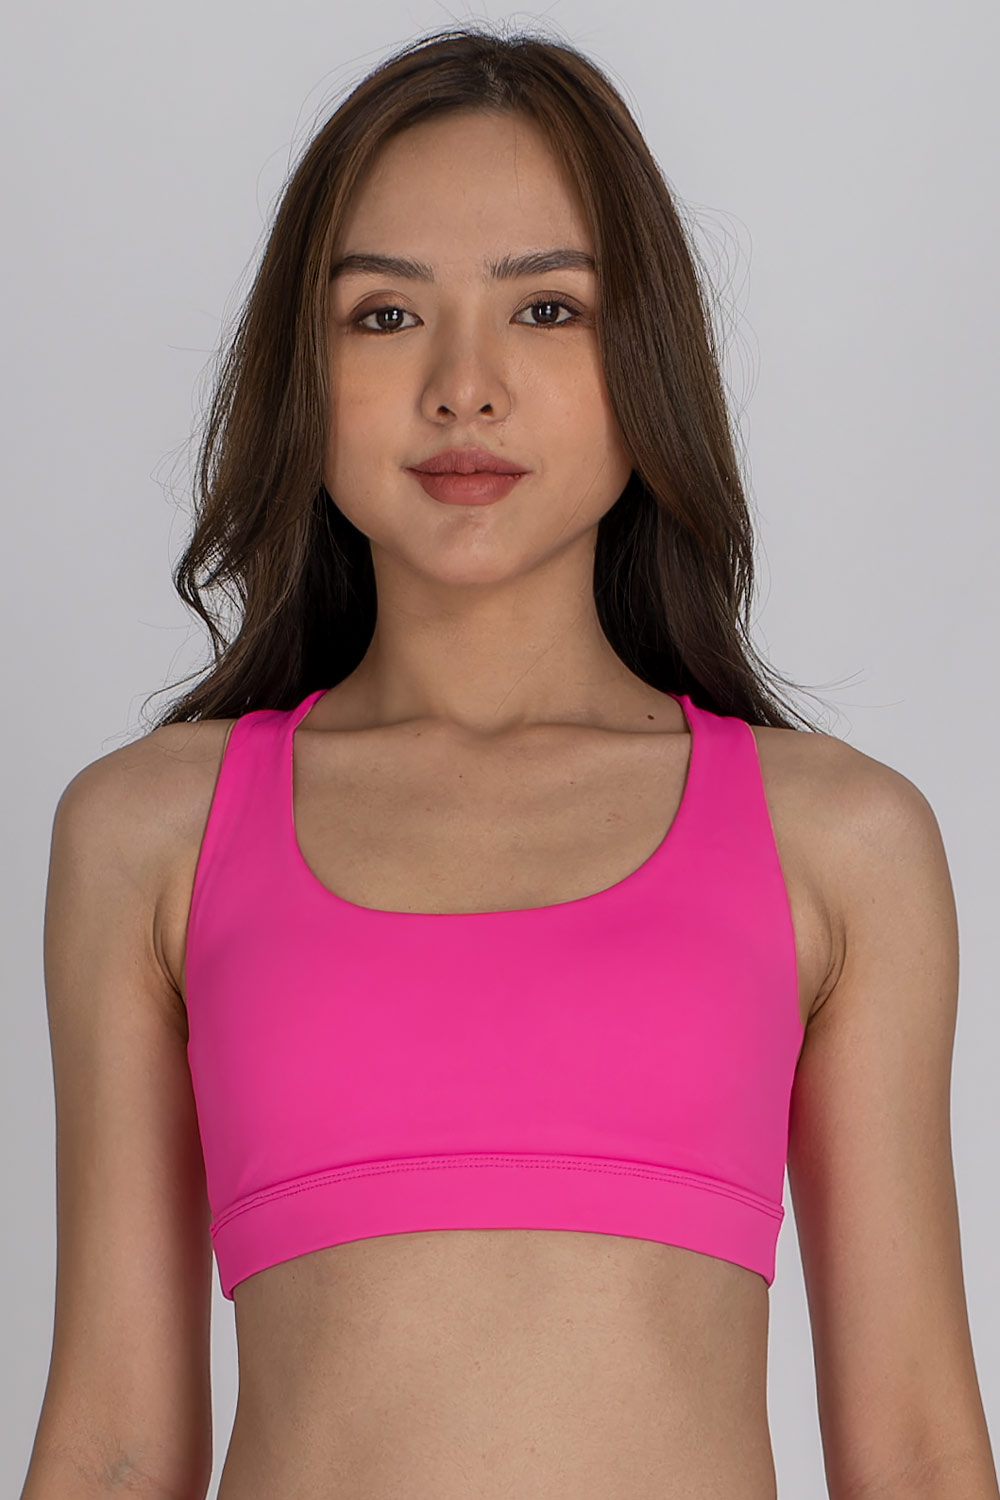 Sports bra with crossed straps in pink for girls and women